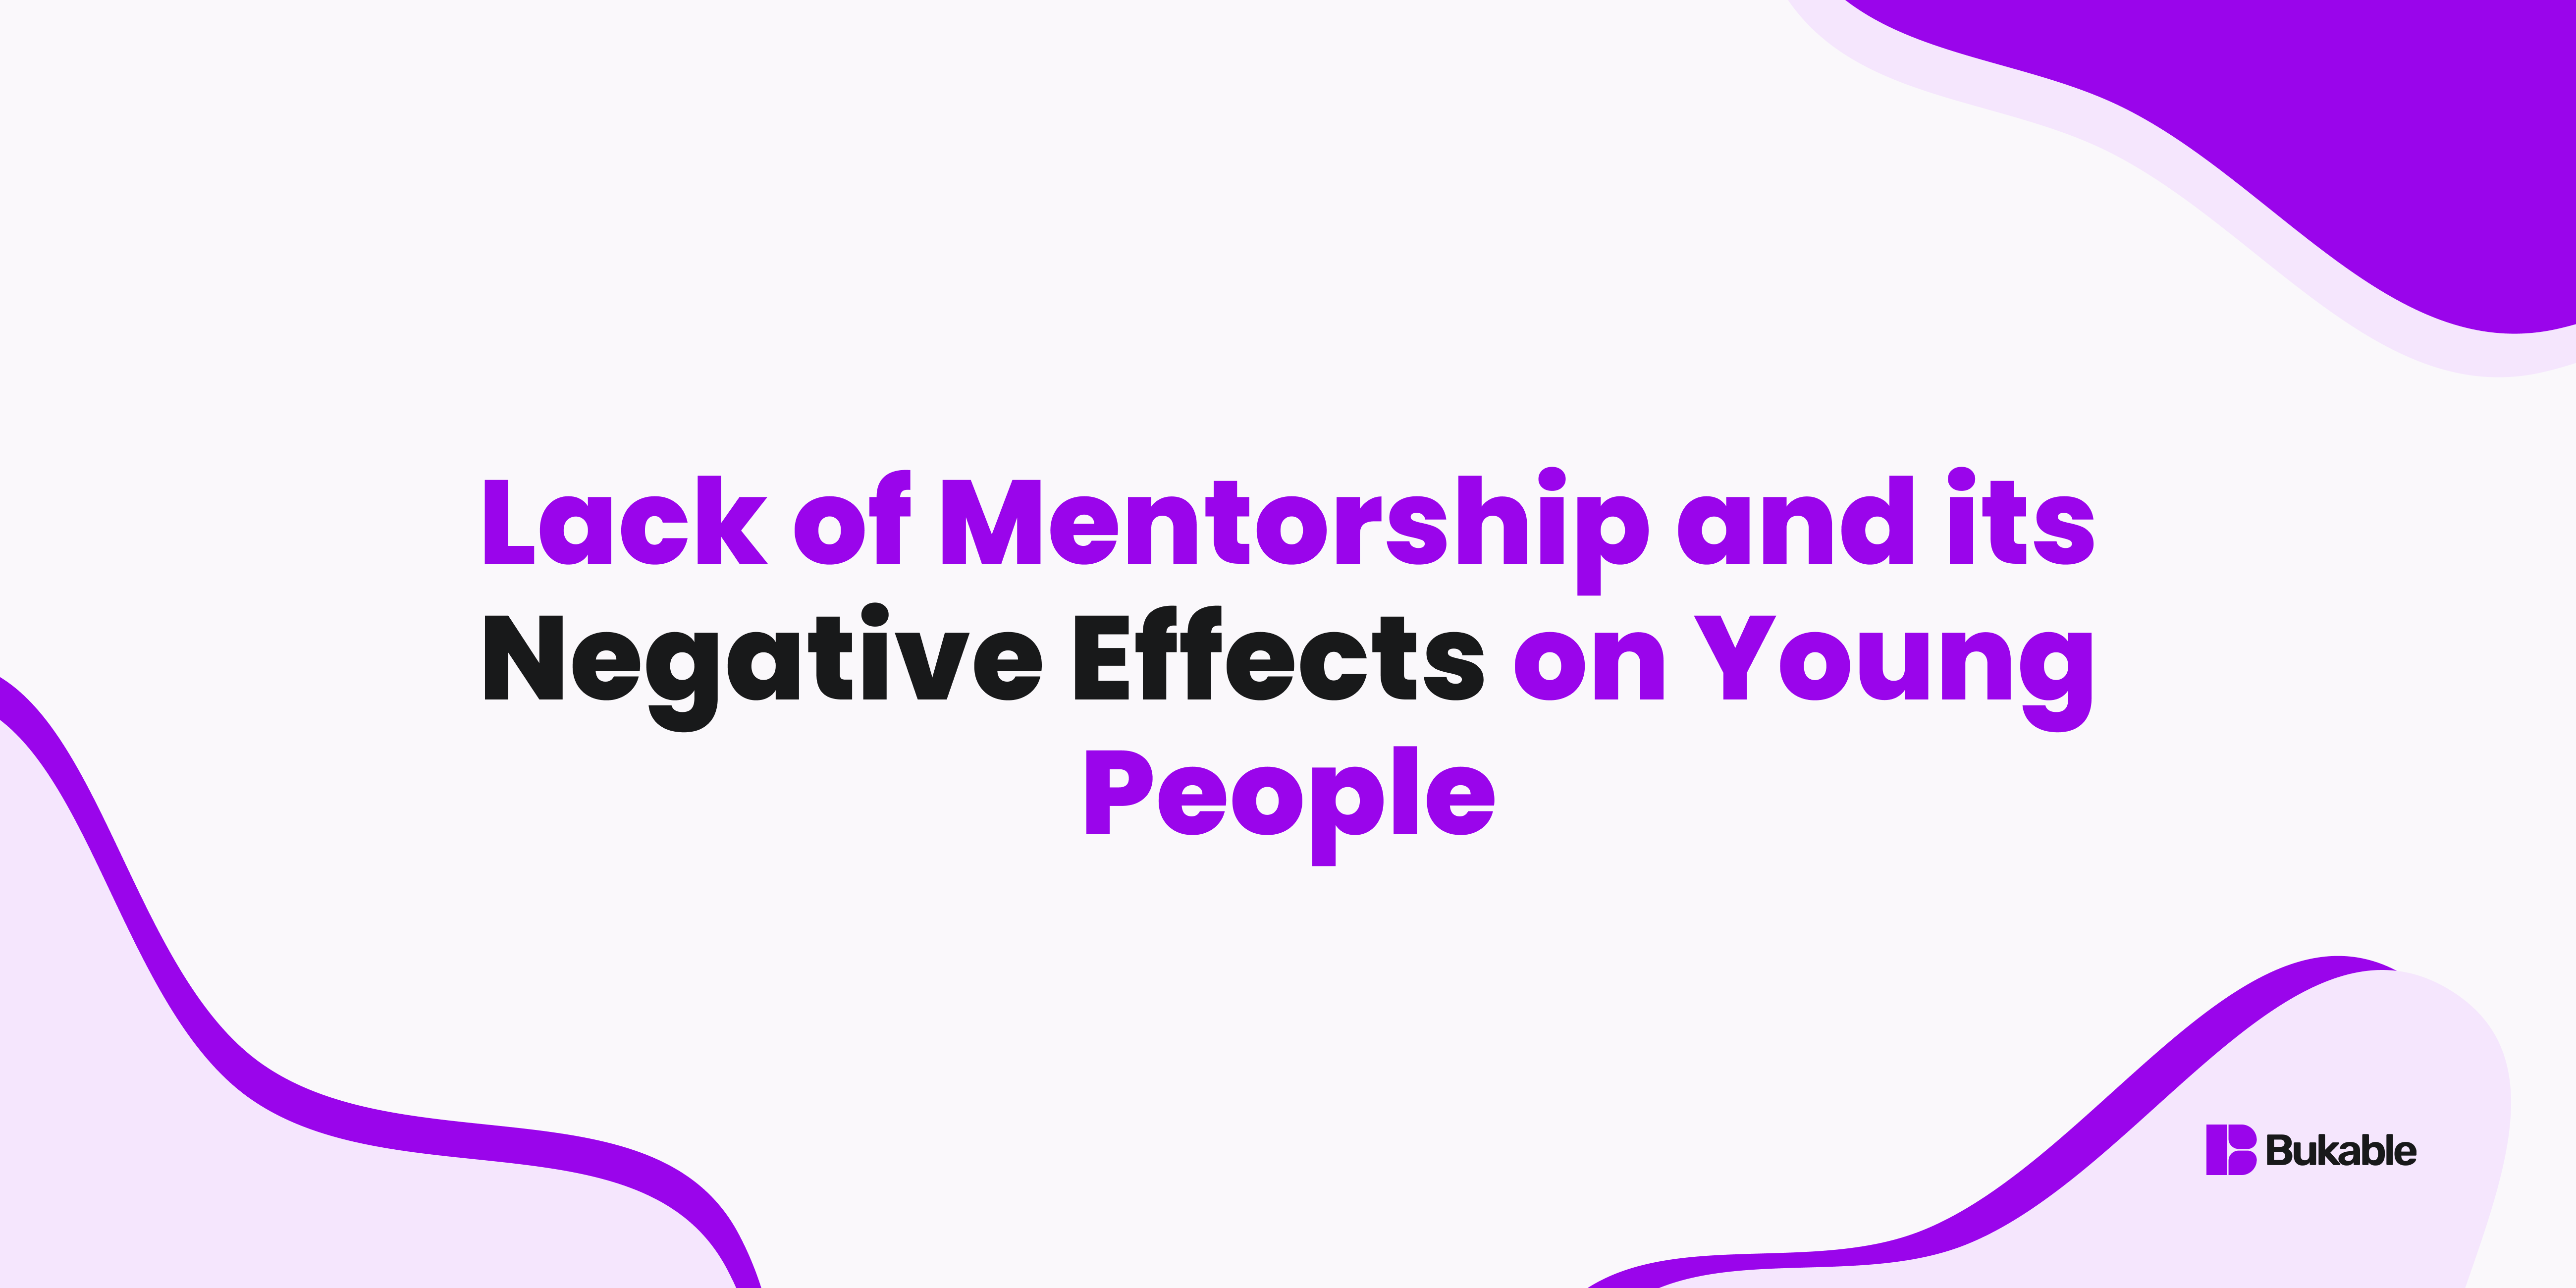 Lack of Mentorship and its Negative Effects on Young People